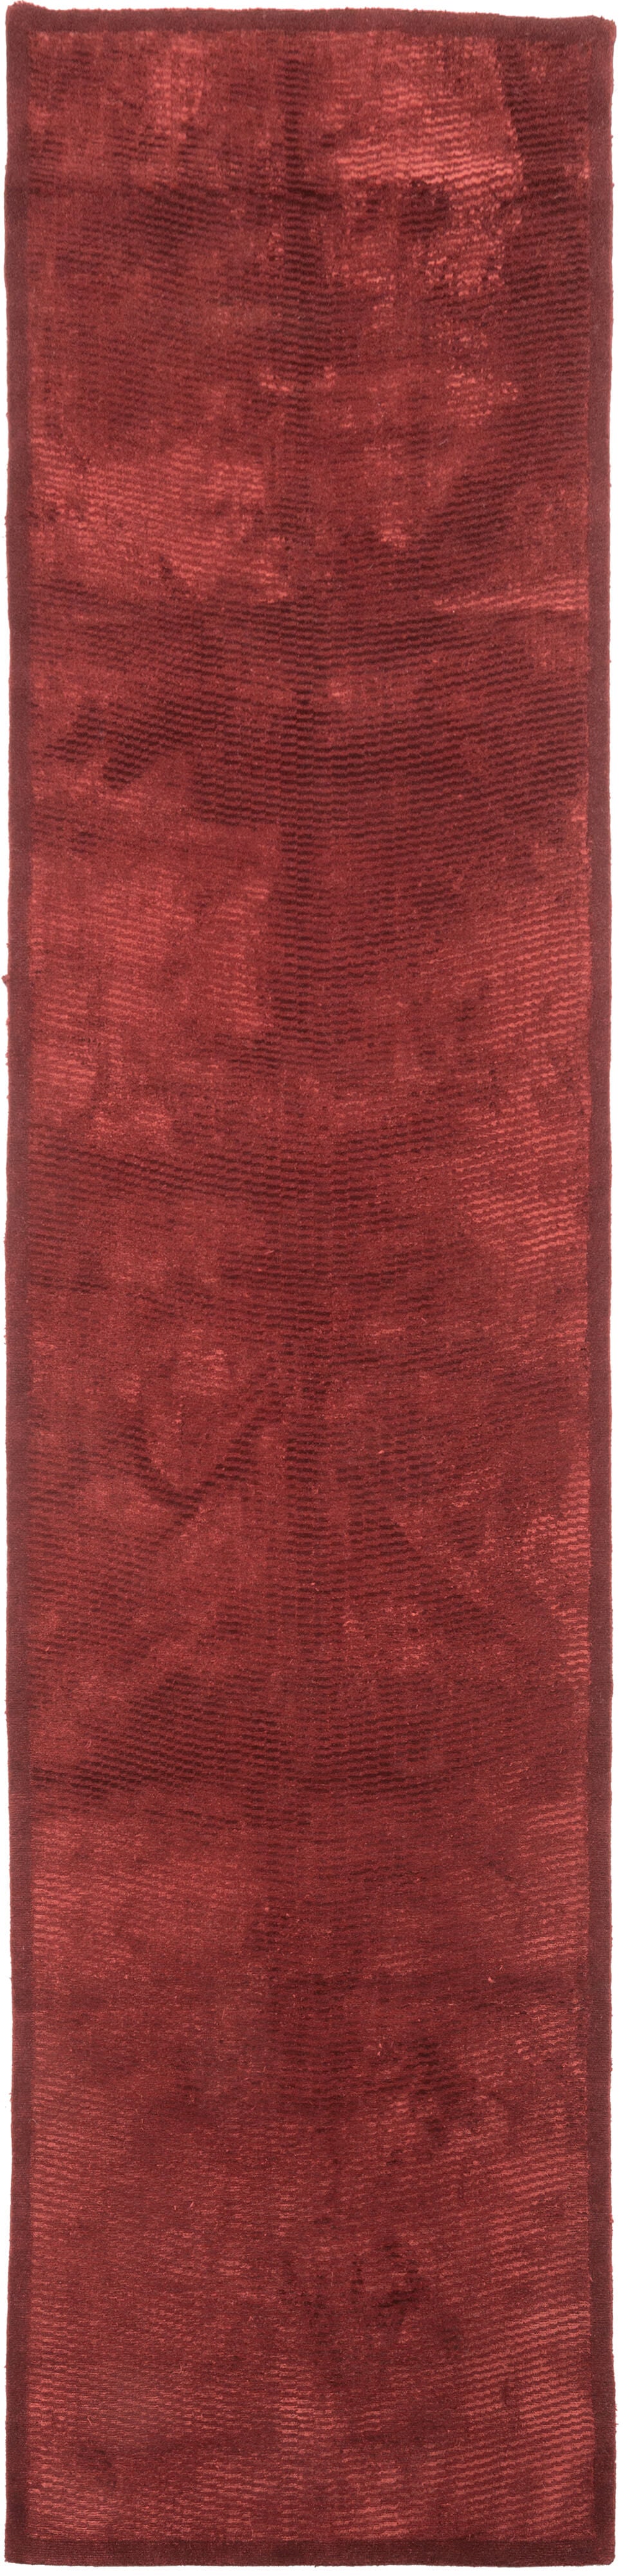 Silk and wool Tibetan orangey red runner was beautifully woven in a shade of deep and brilliant red. The wavy undulating pattern comes through thanks to the contrast between the wool and silk, the play of light and dark emphasized by the light. 